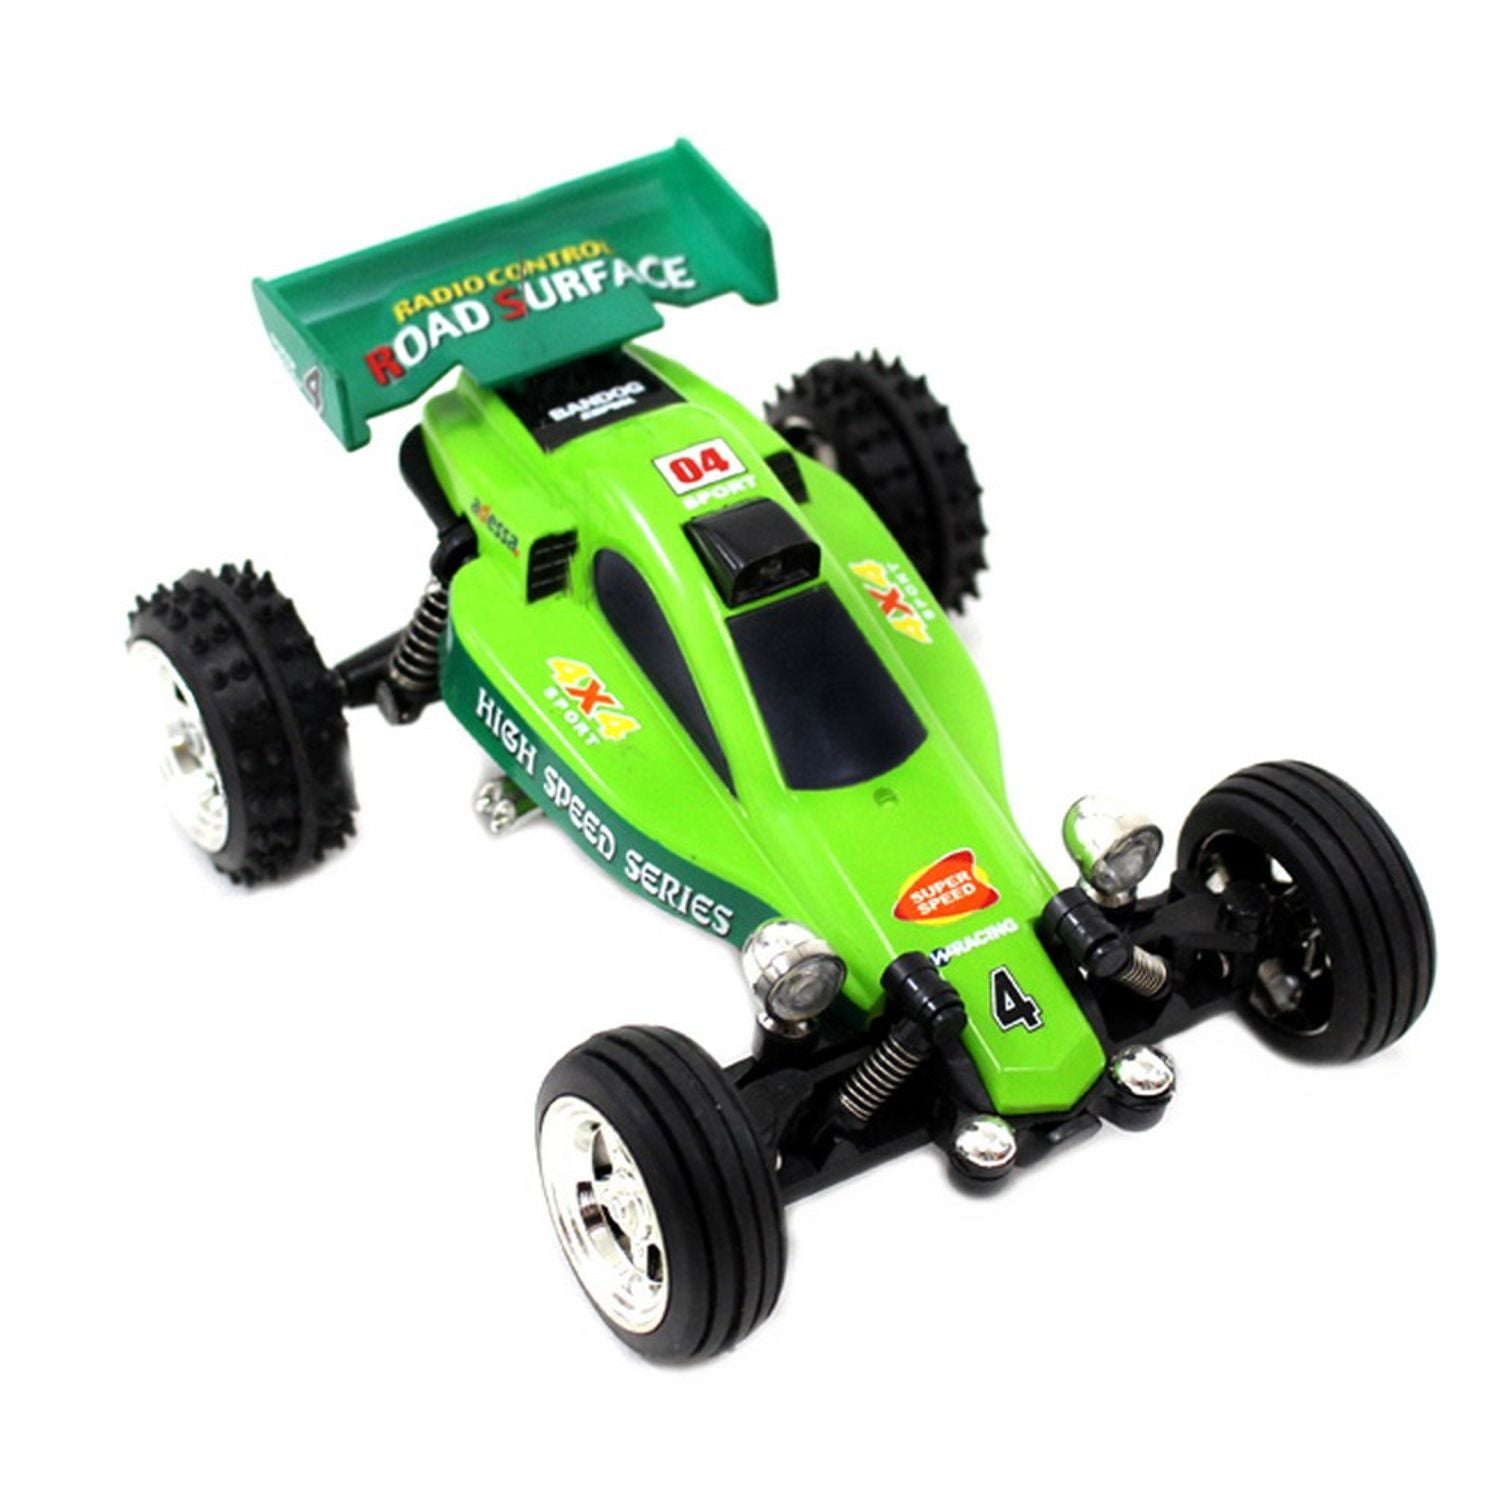 play rc mini racers online